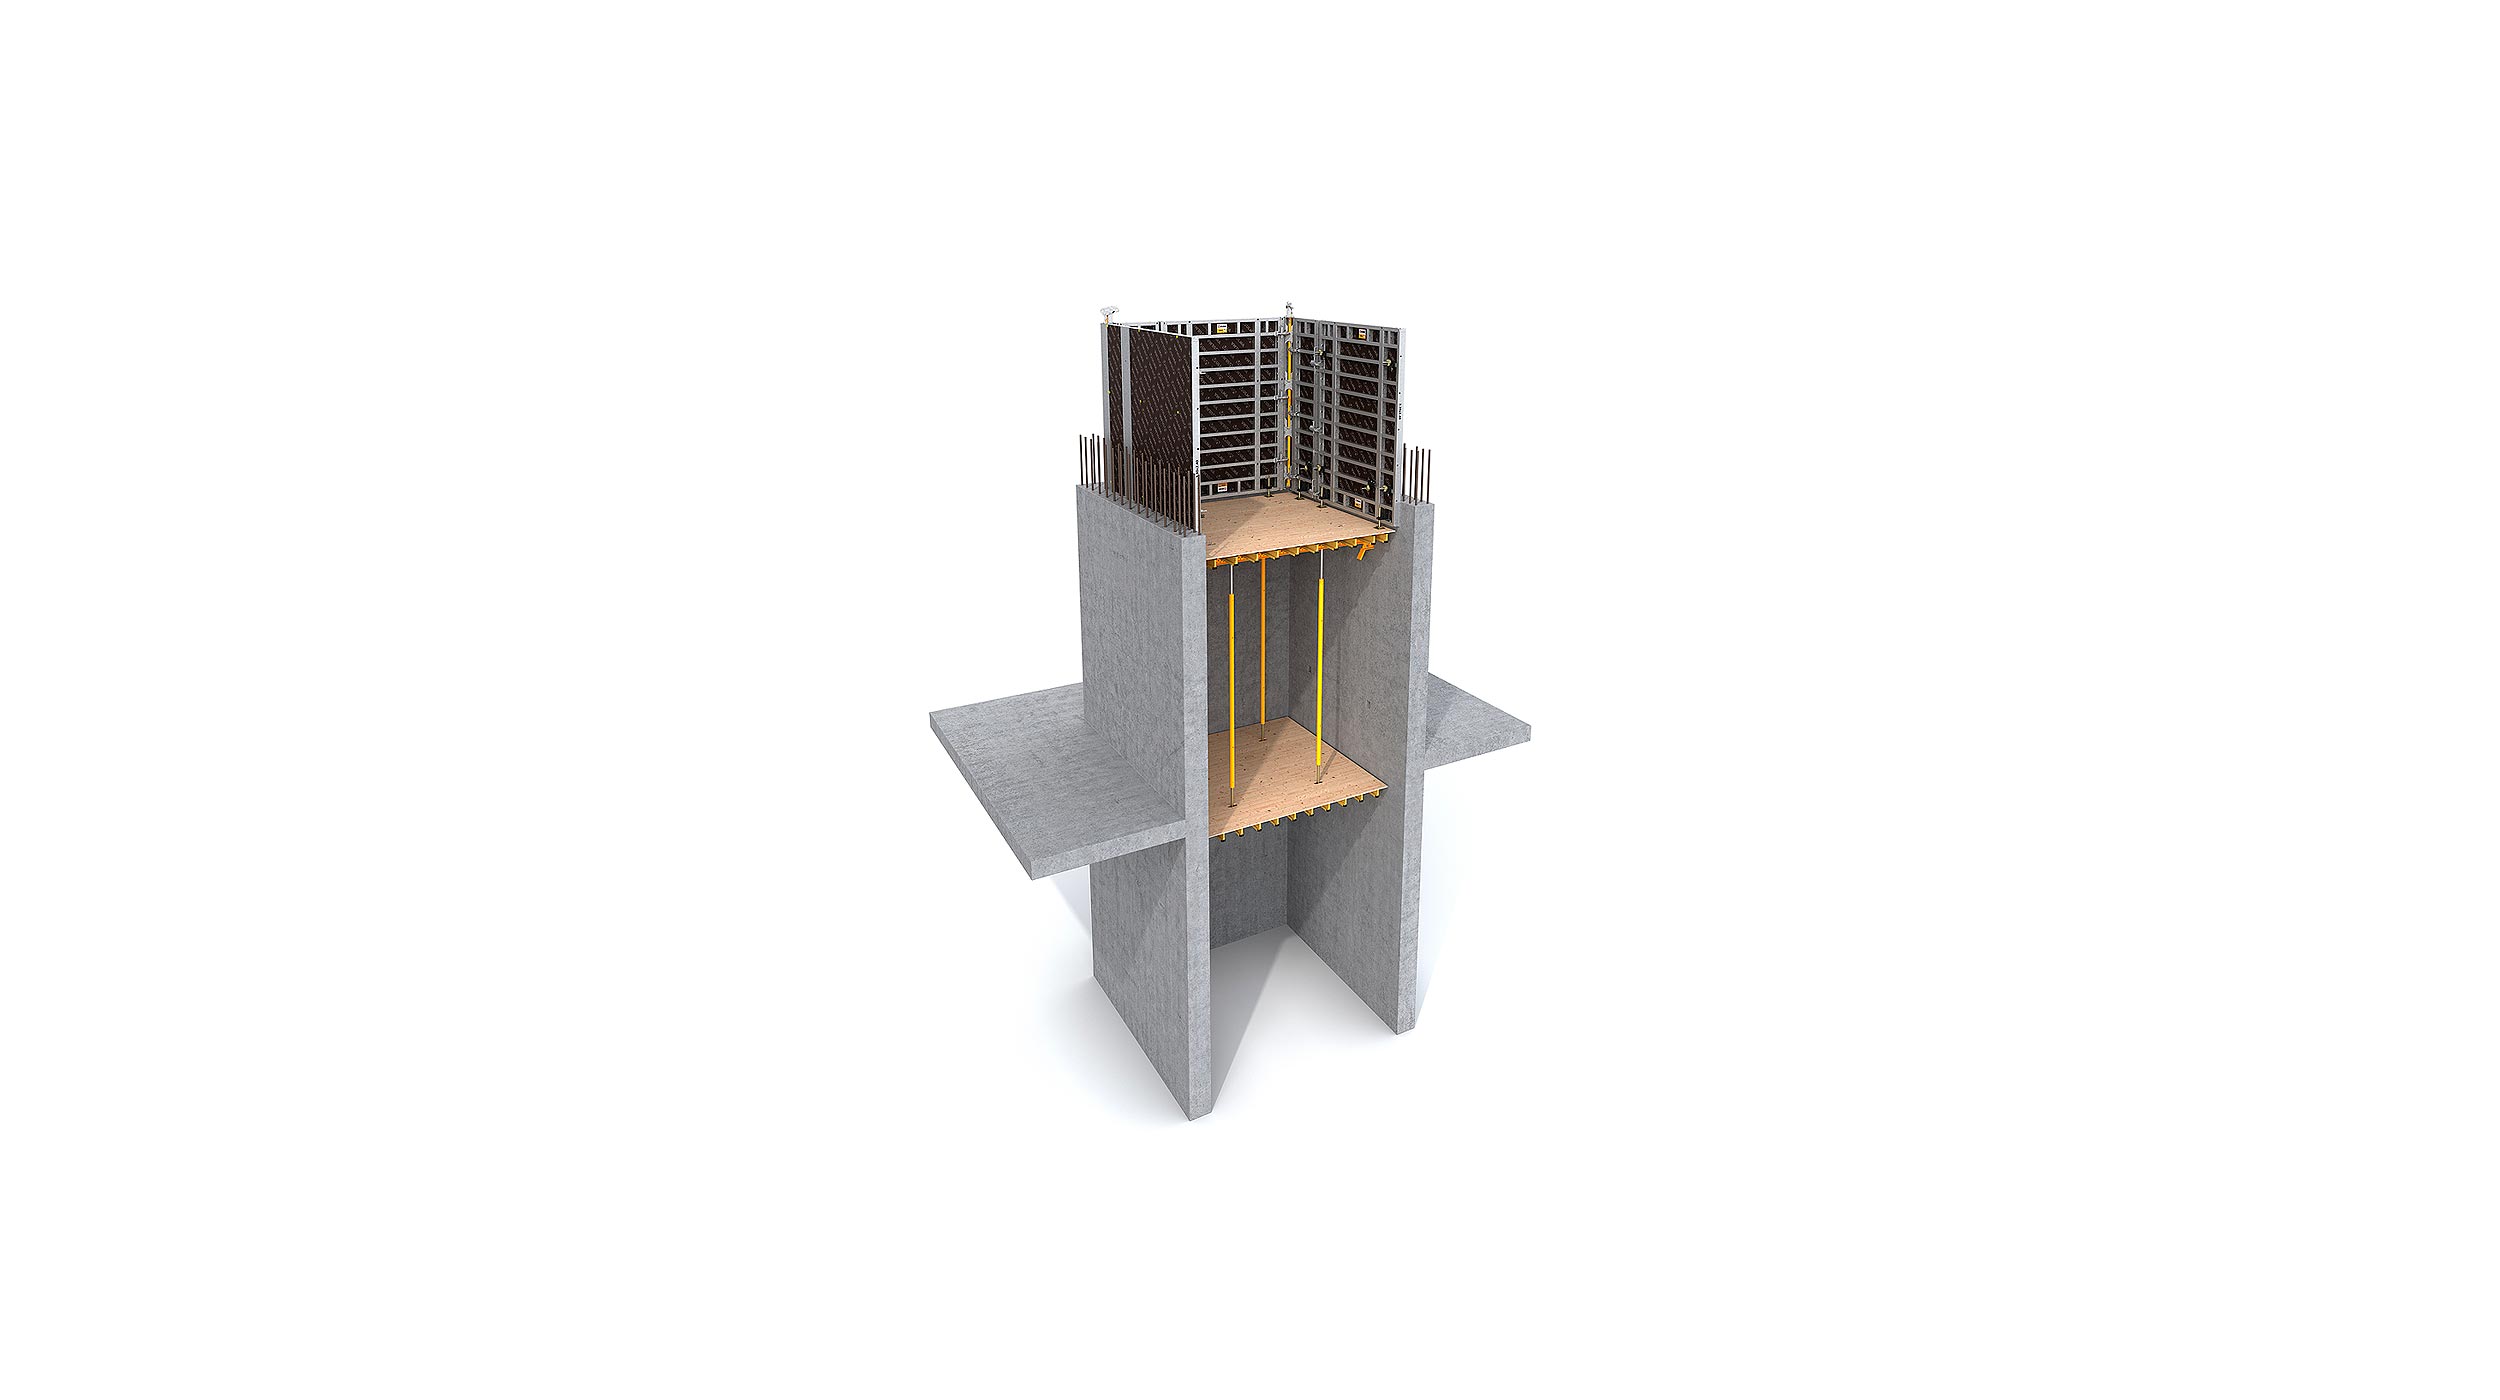 A simple solution for supporting shaft internal formwork or walkway support. Perfect for elevator and staircase shafts, building cores, hollow piers, etc.